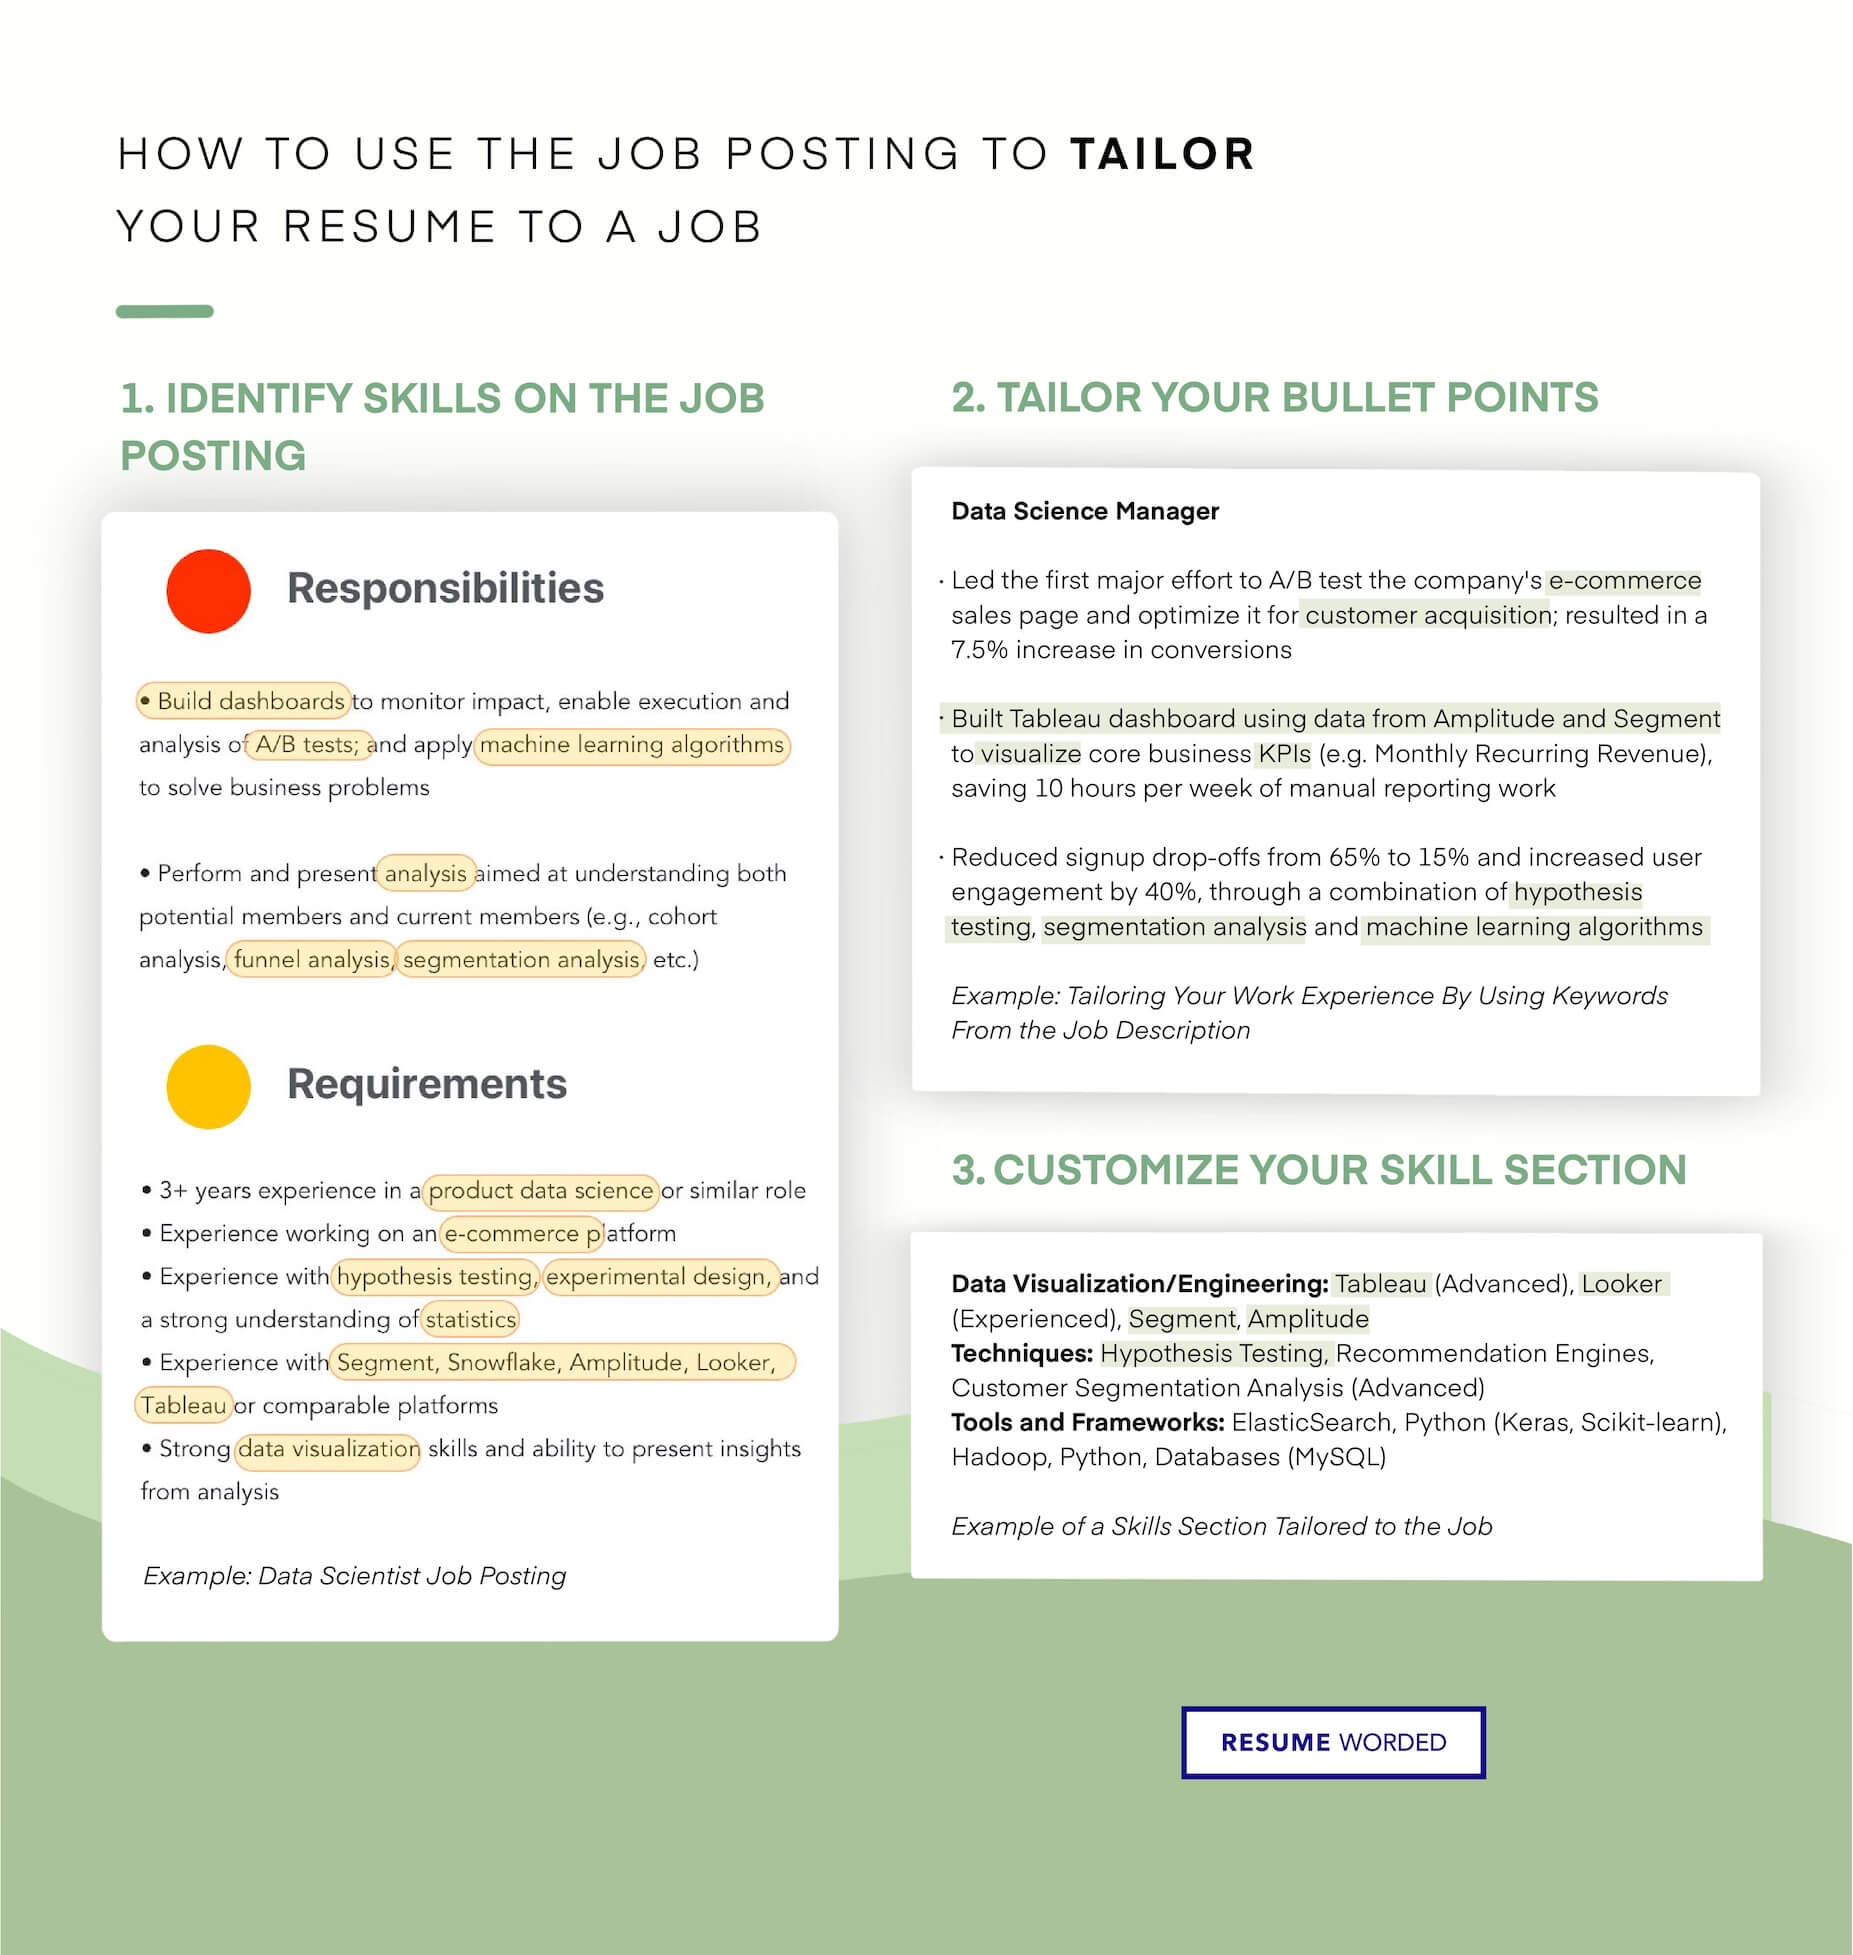 Target your medical billing resume to beat the ATS - Medical Billing Specialist Resume